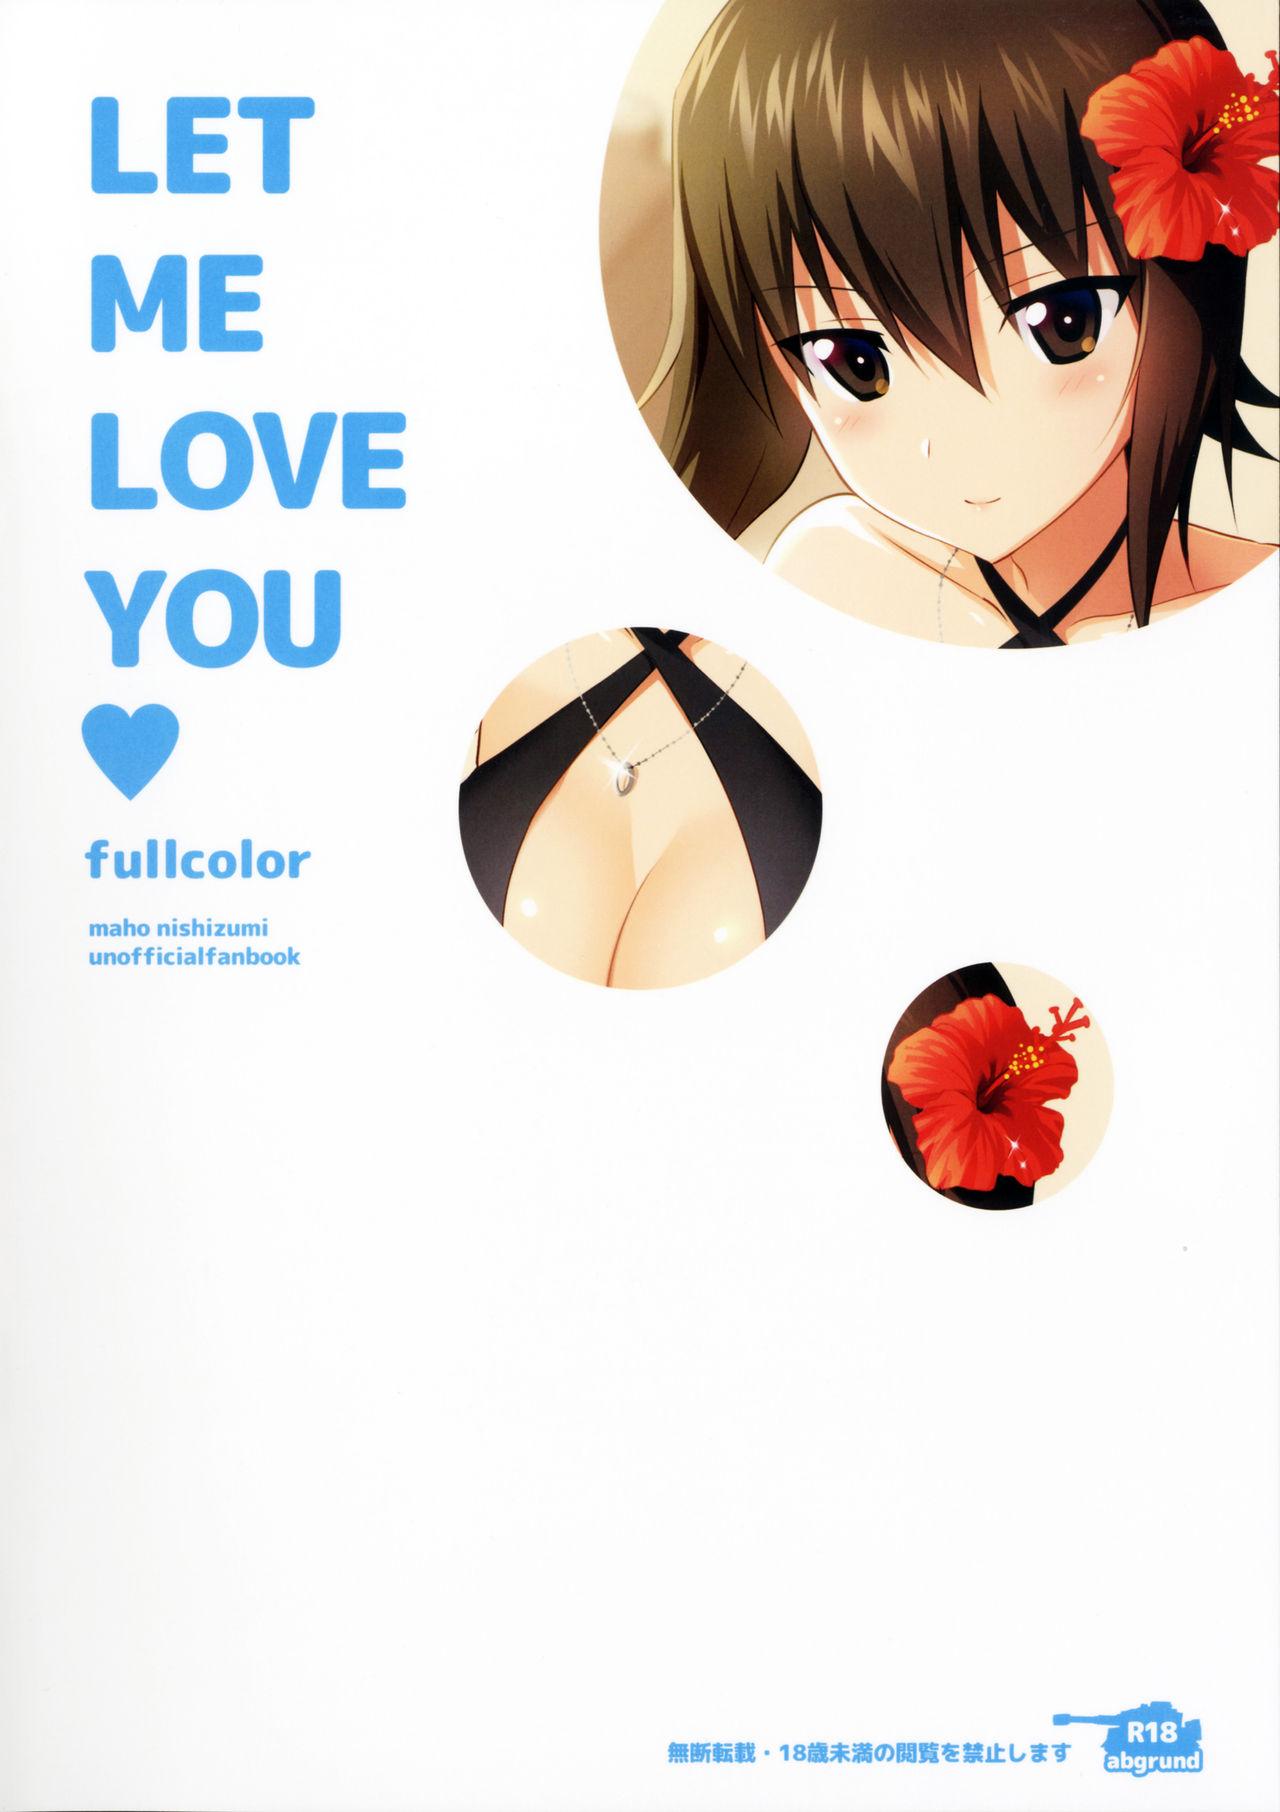 Milfs LET ME LOVE YOU fullcolor - Girls und panzer Free Hardcore Porn - Page 19